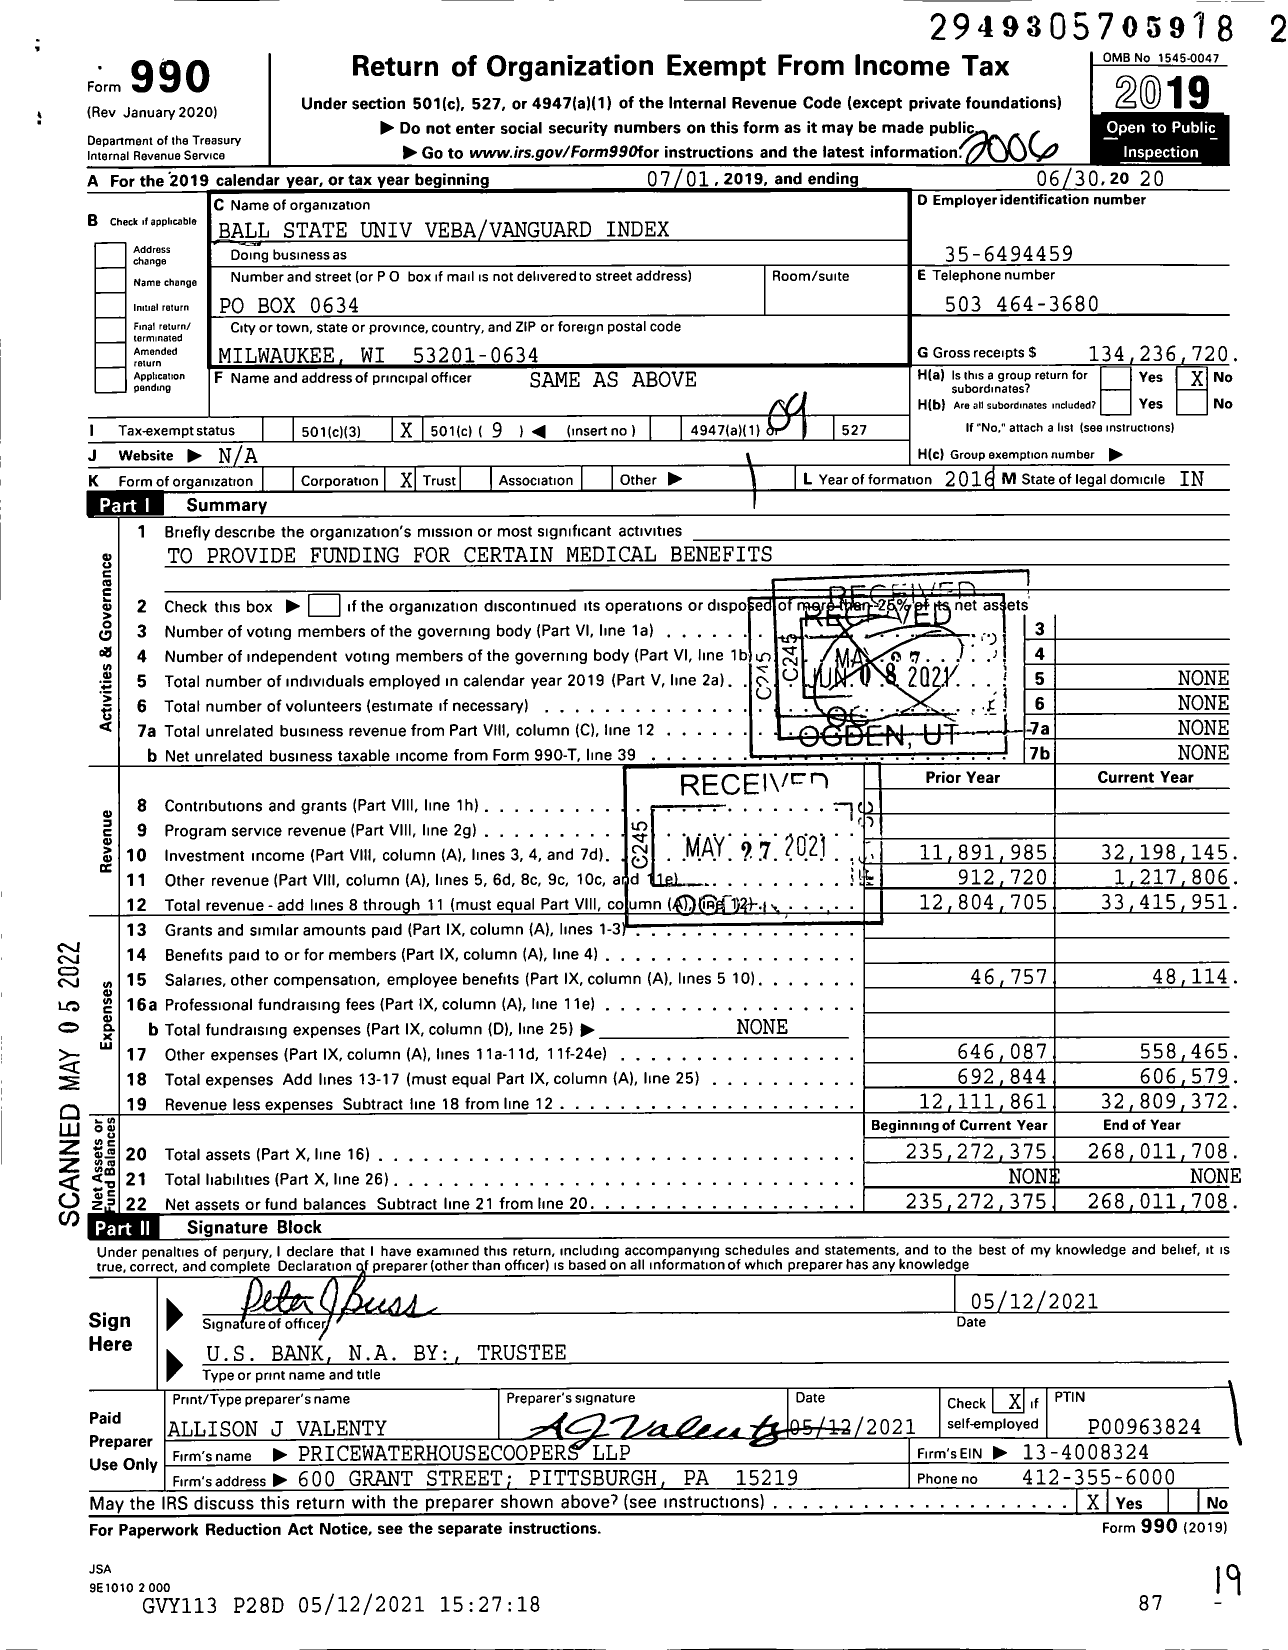 Image of first page of 2019 Form 990O for Ball State University Veba Vanguard Index